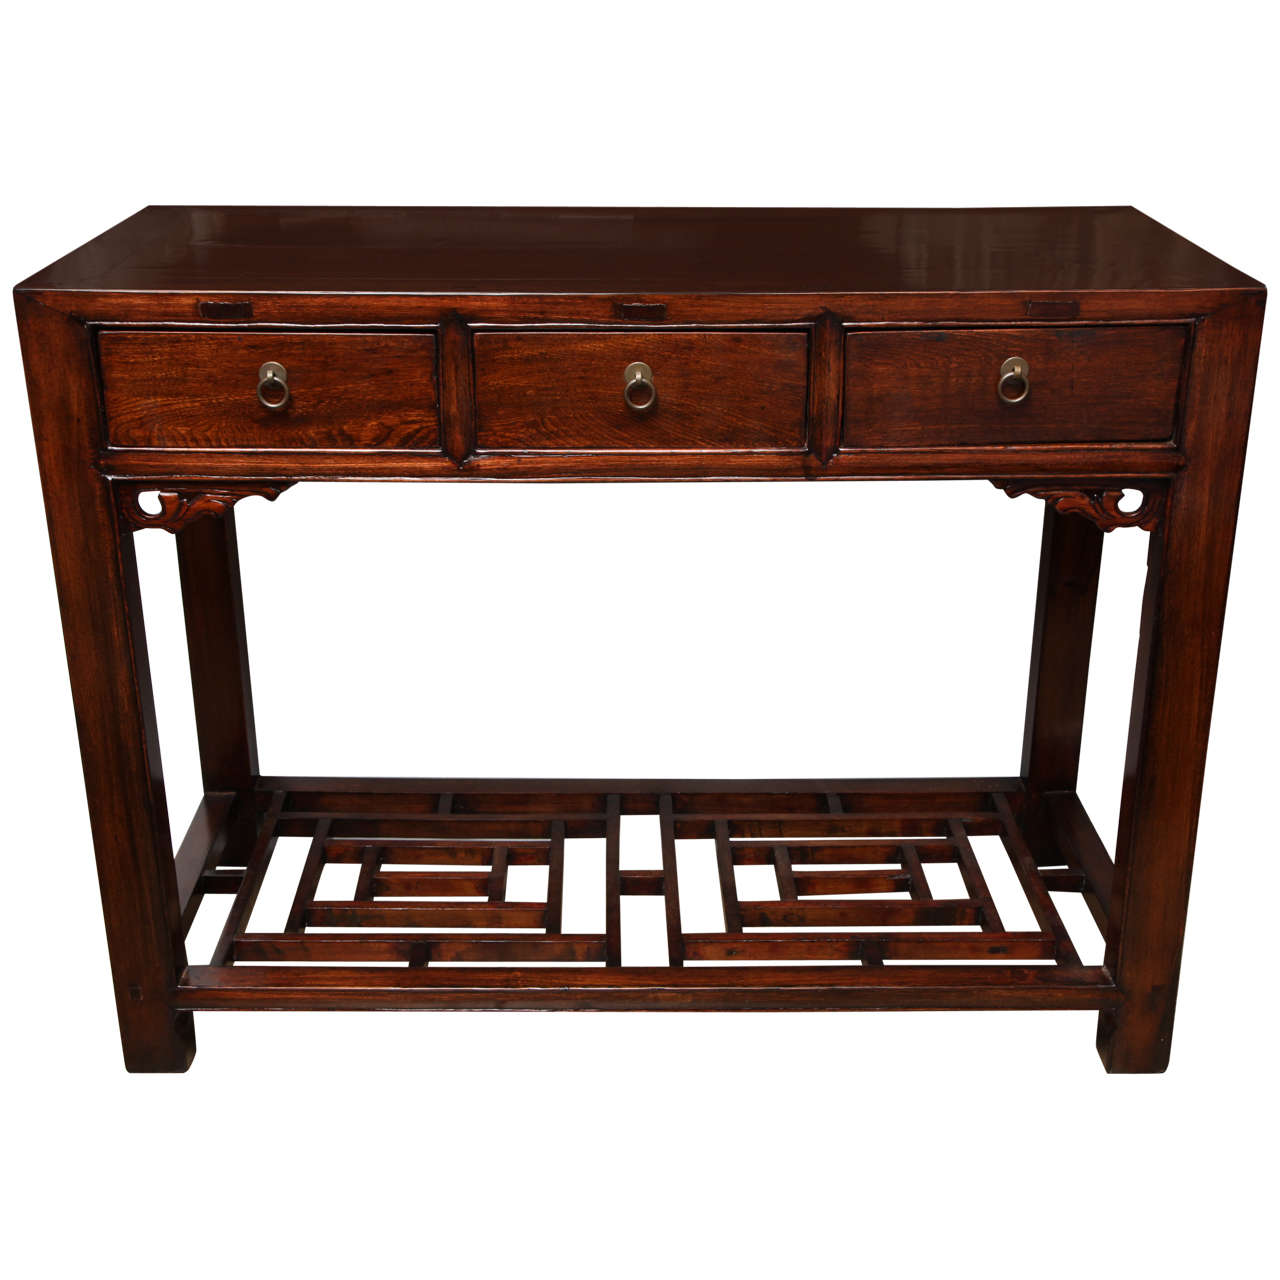 Three-Drawer Table or Desk